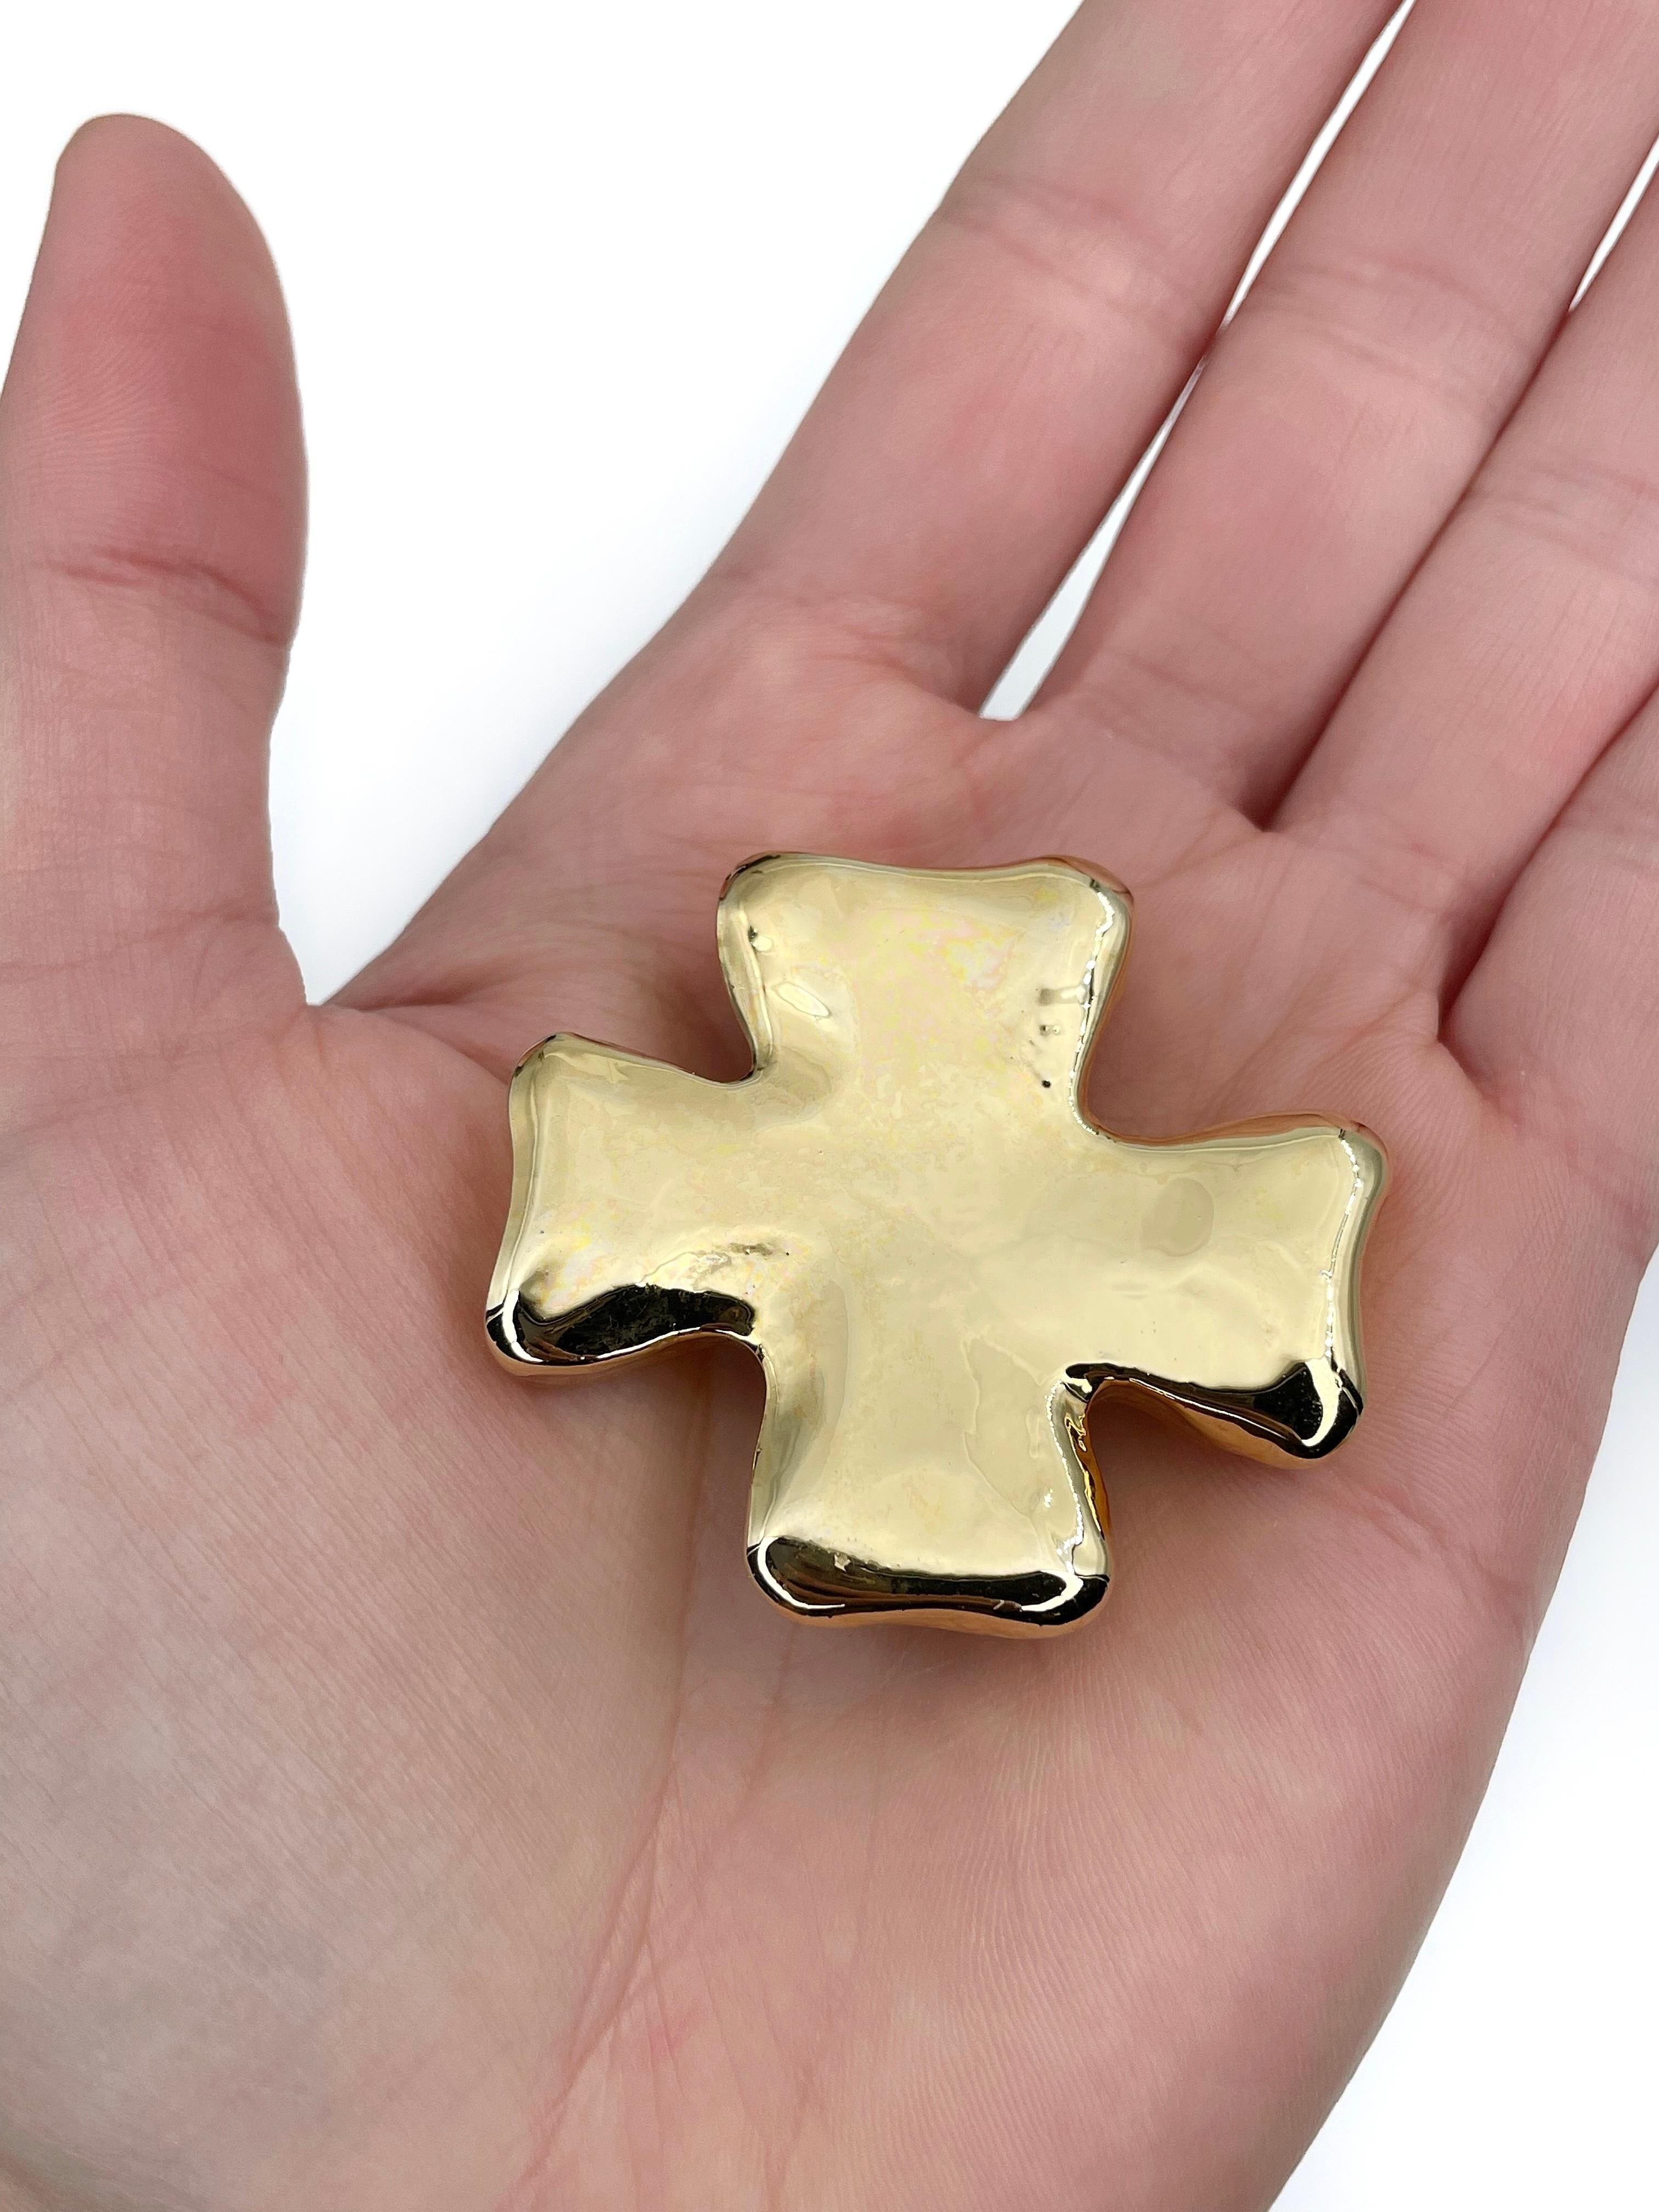 This is a vintage gold tone cross design pin brooch designed by Christian Lacroix in 1980’s. The piece is gold plated. 

Signed: “Christian Lacroix - CL - Made in France”.

Size: 4.5x4cm

———

If you have any questions, please feel free to ask. We